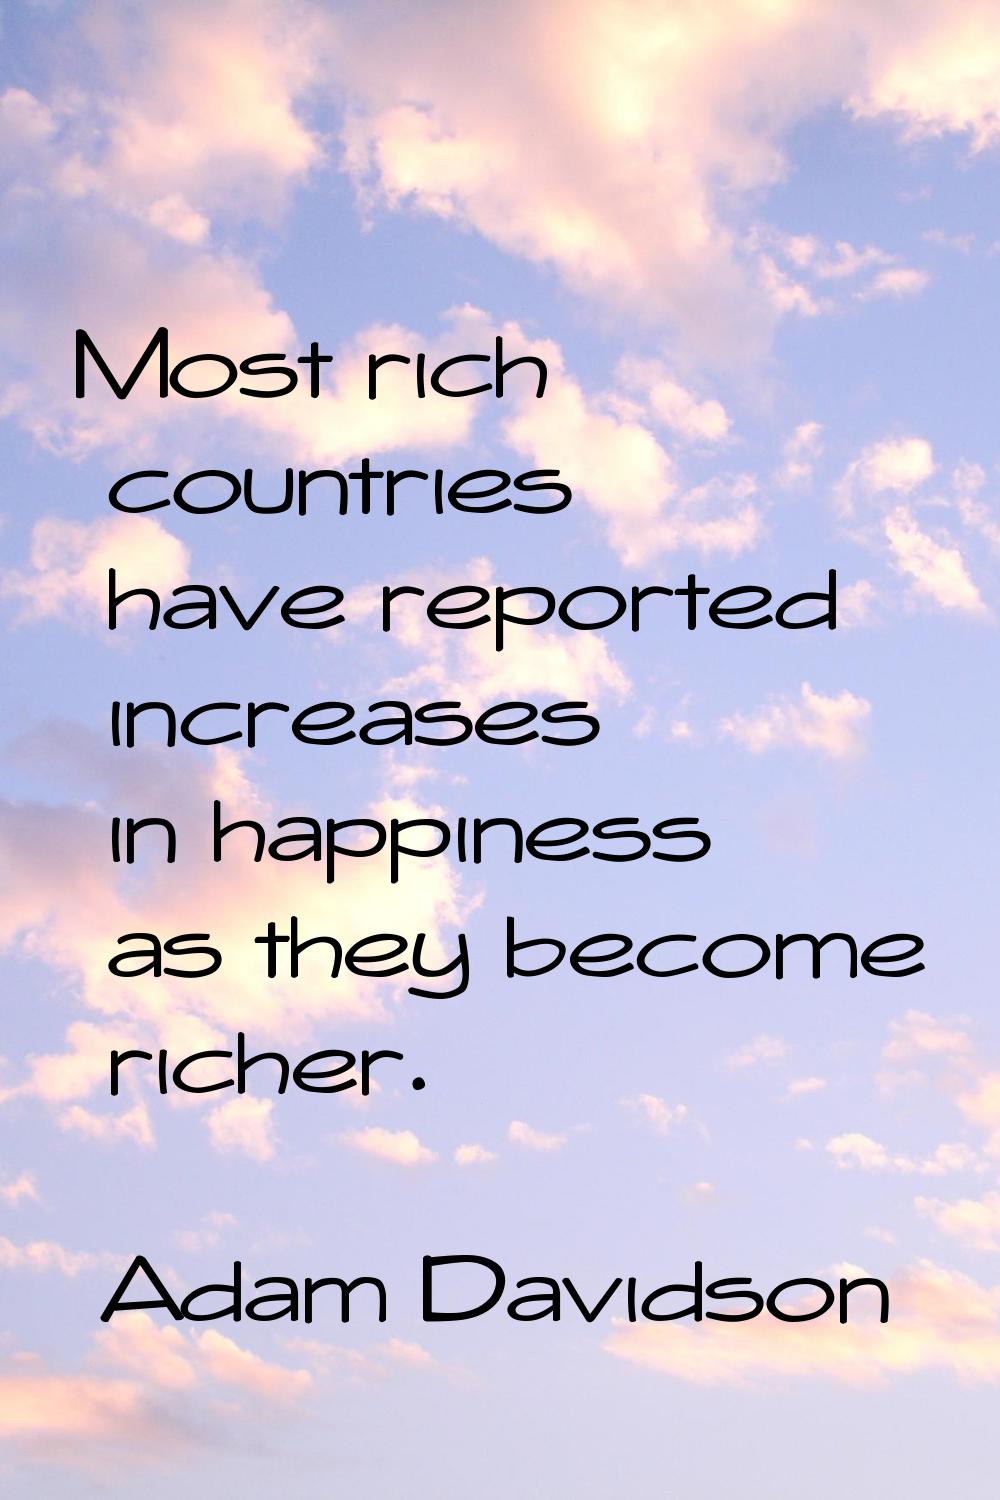 Most rich countries have reported increases in happiness as they become richer.